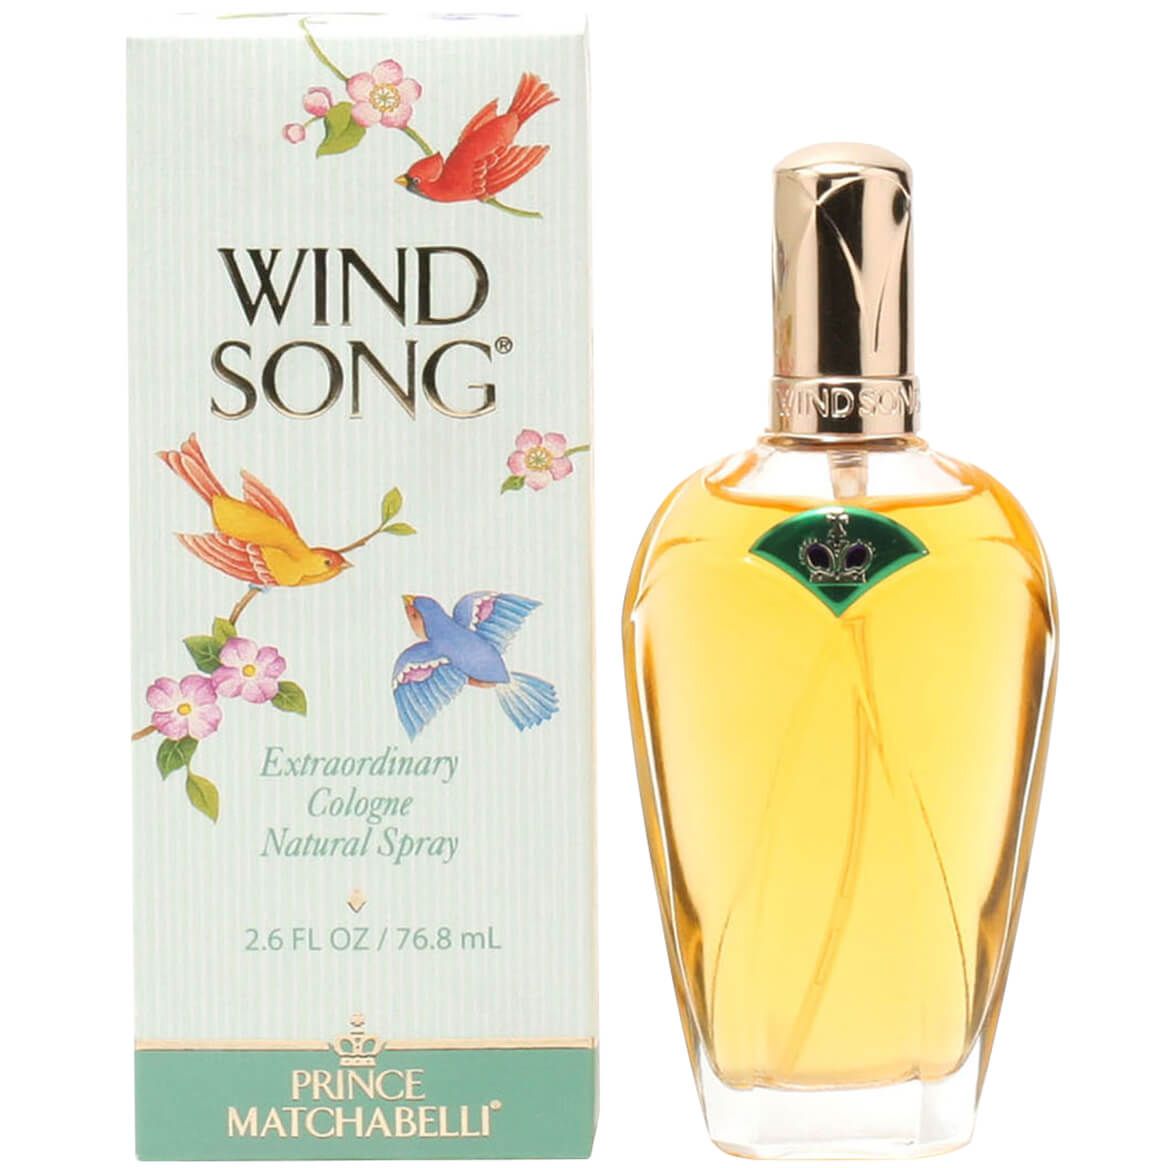 Wind Song by Prince Matchabelli Cologne Spray + '-' + 350335